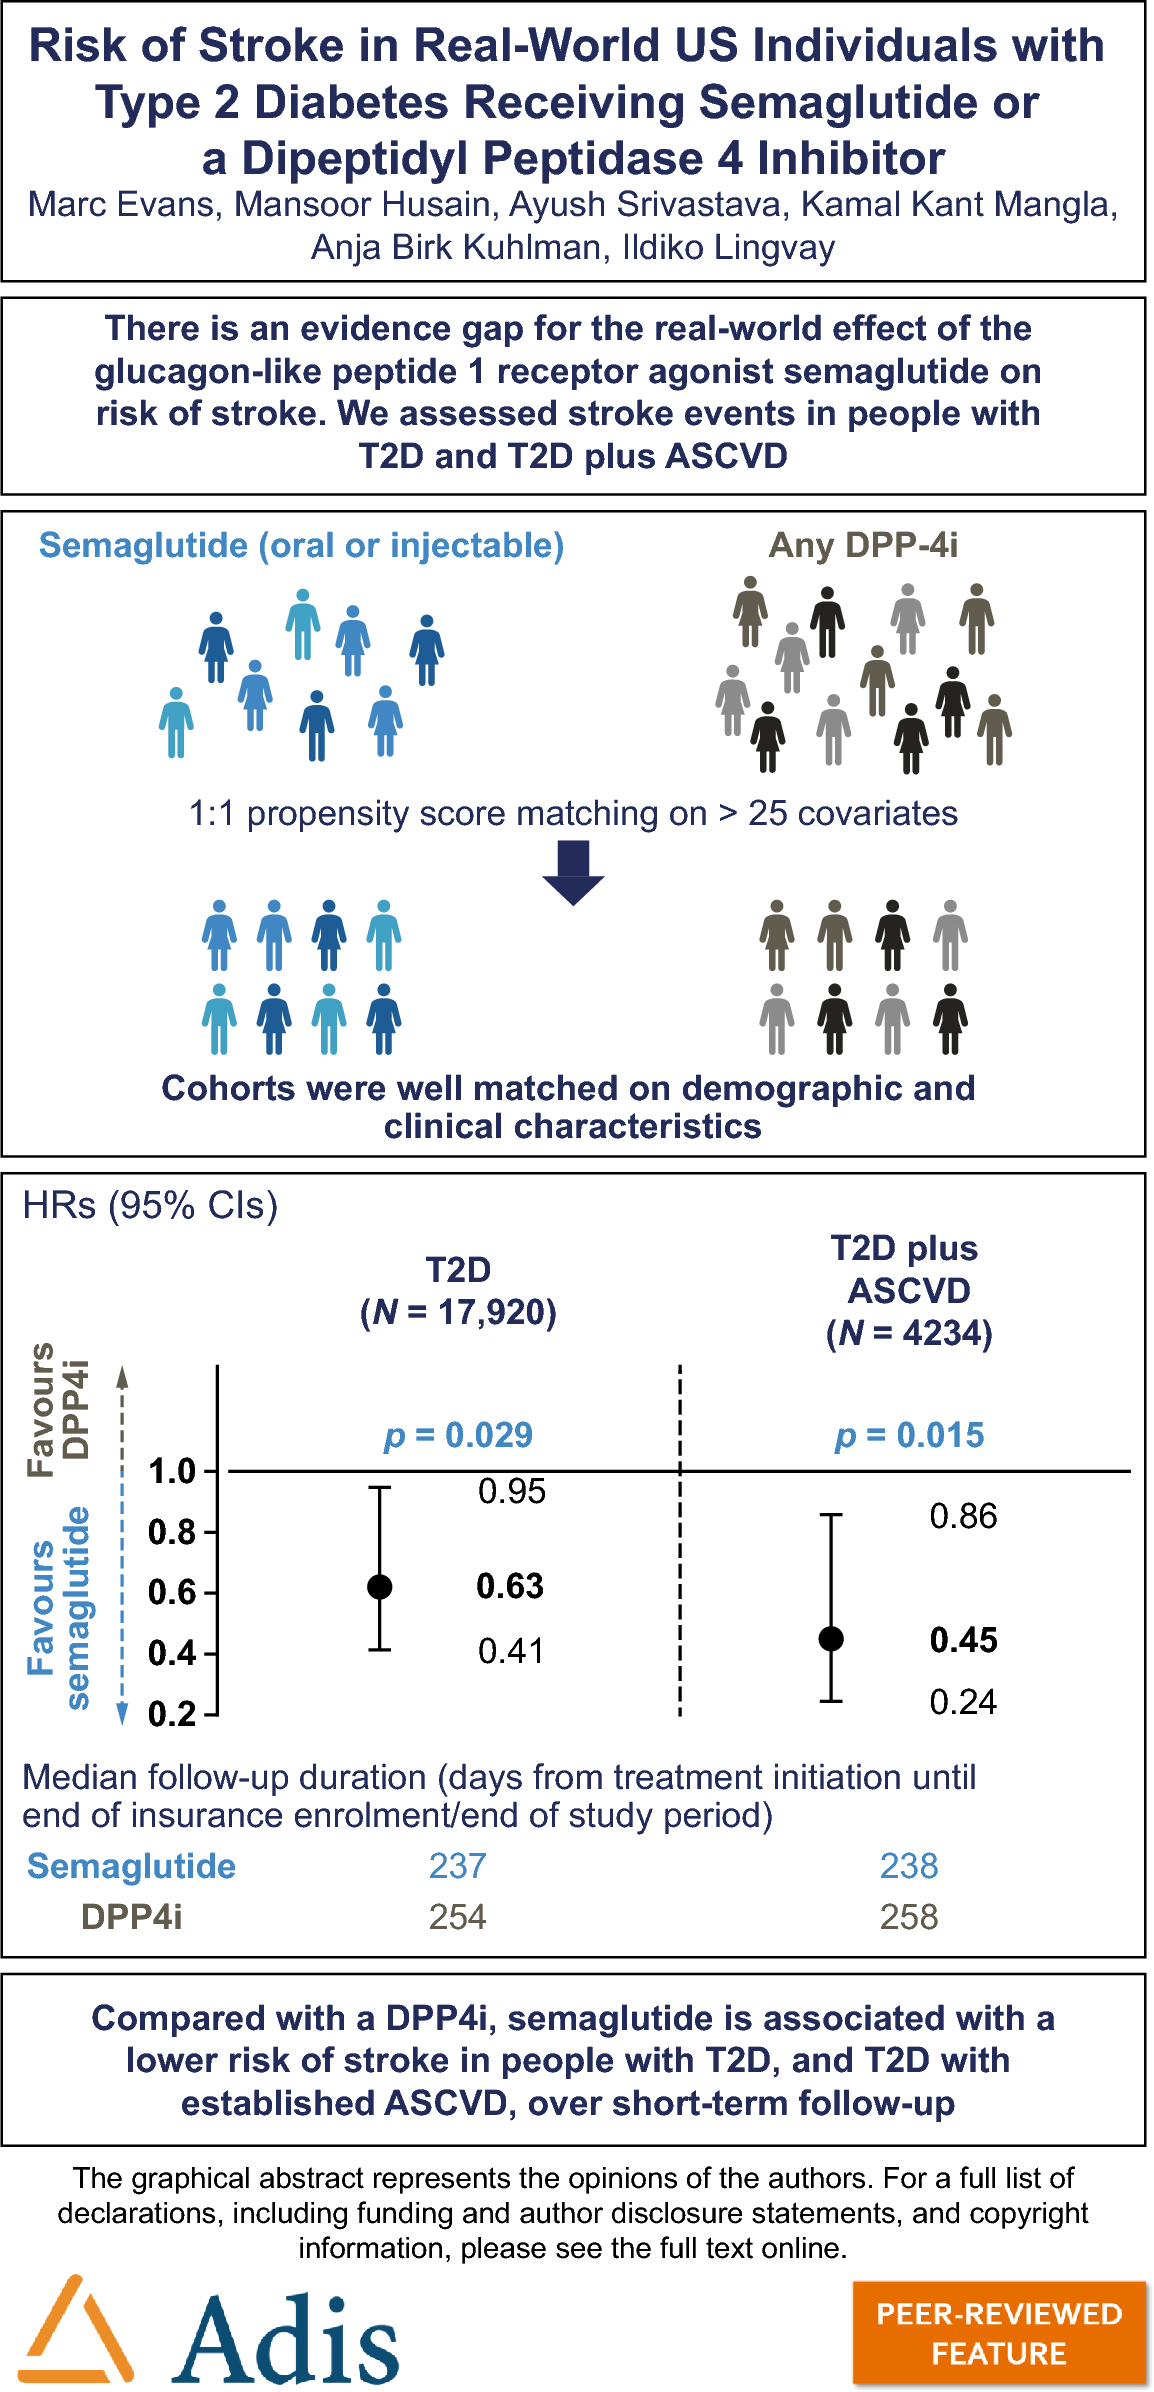 Risk of Stroke in Real-World US Individuals with Type 2 Diabetes Receiving Semaglutide or a Dipeptidyl Peptidase 4 Inhibitor